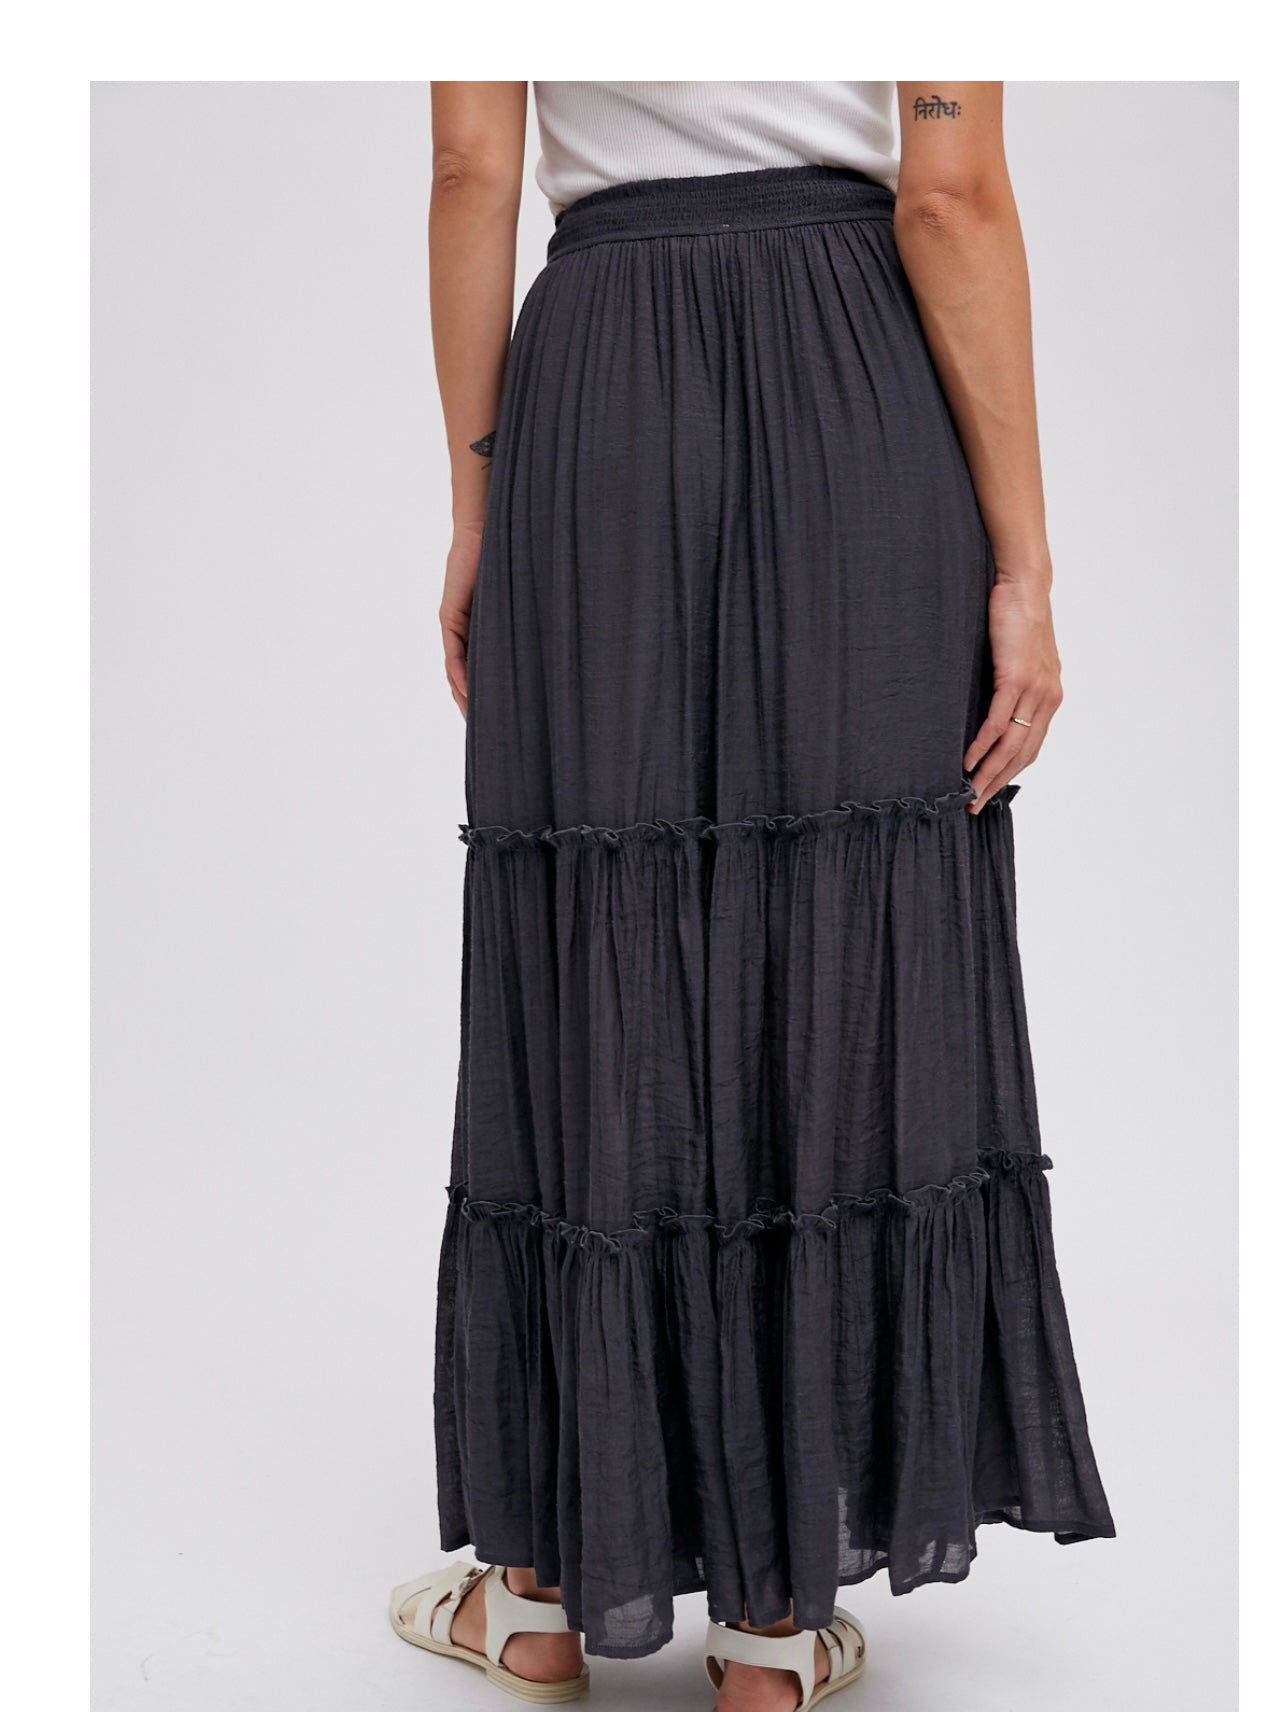 Tiered Ruffle Flow Maxi Skirt in Ash Grey